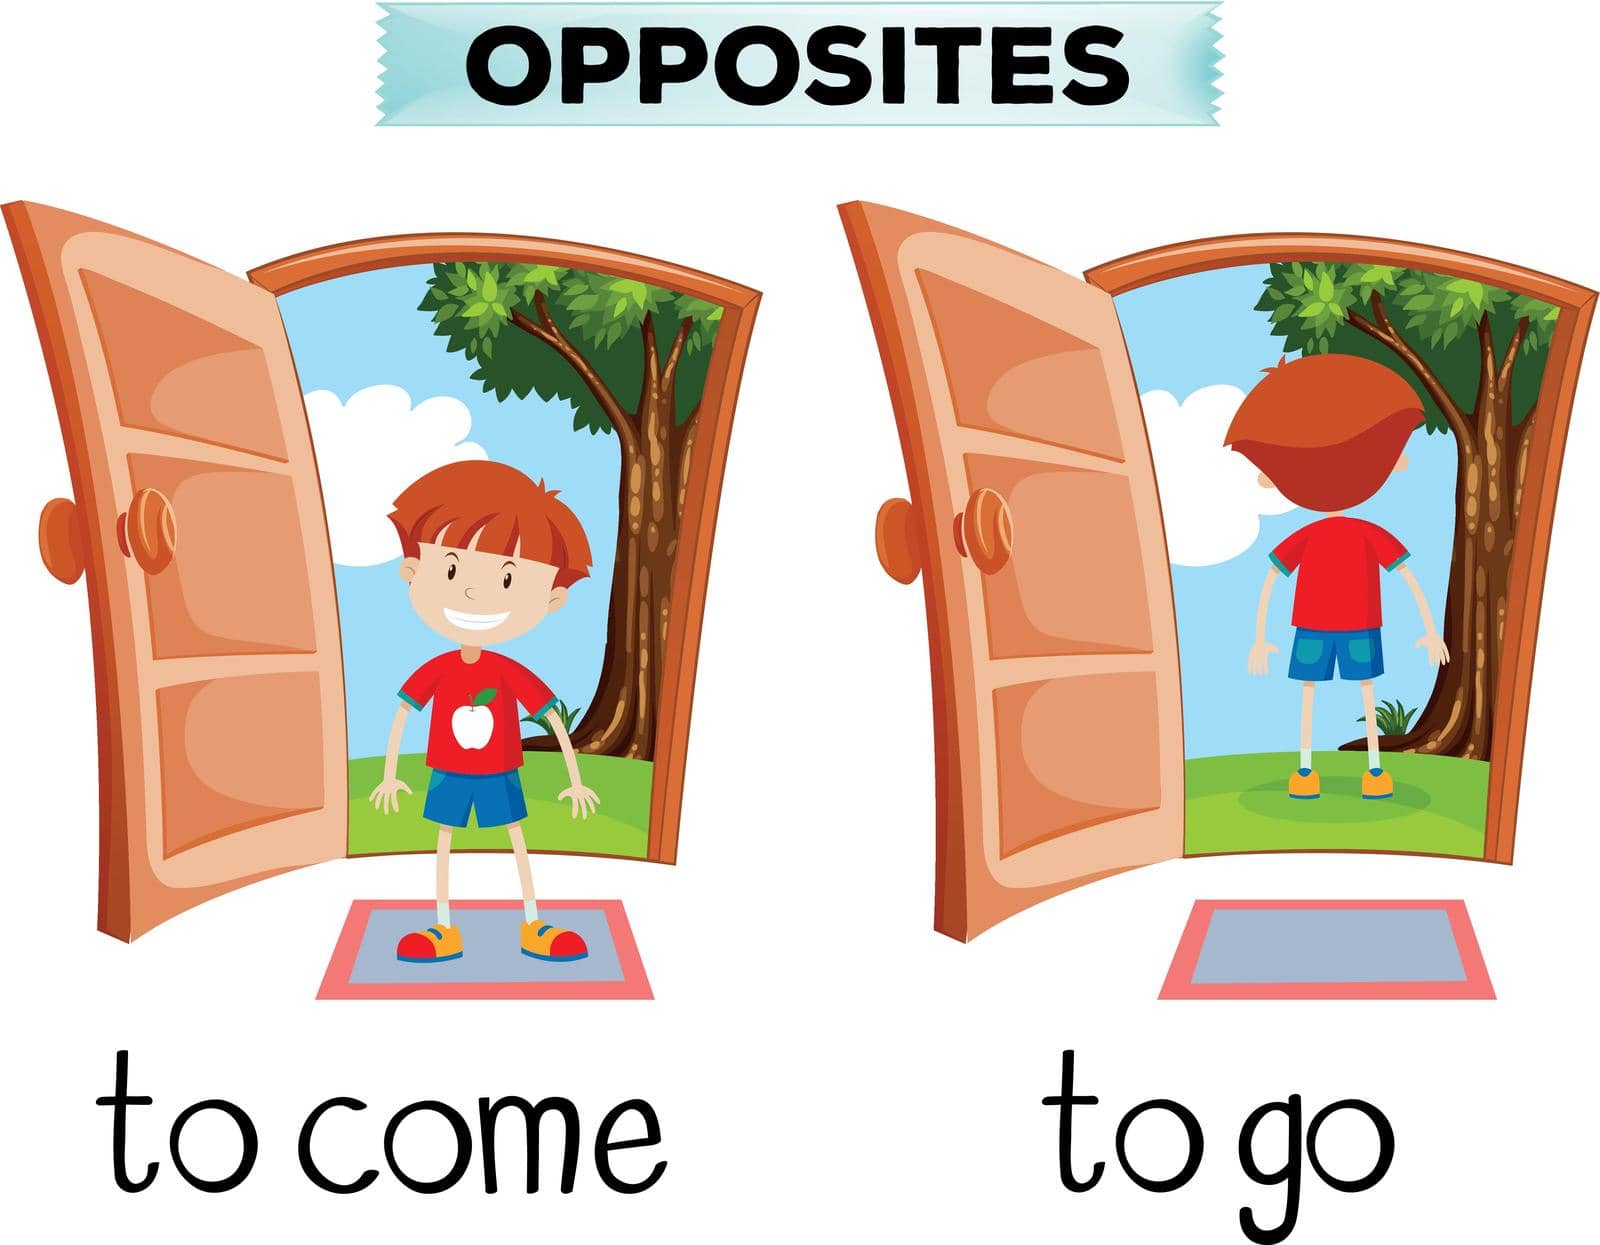 Opposite words for come and go by iimages